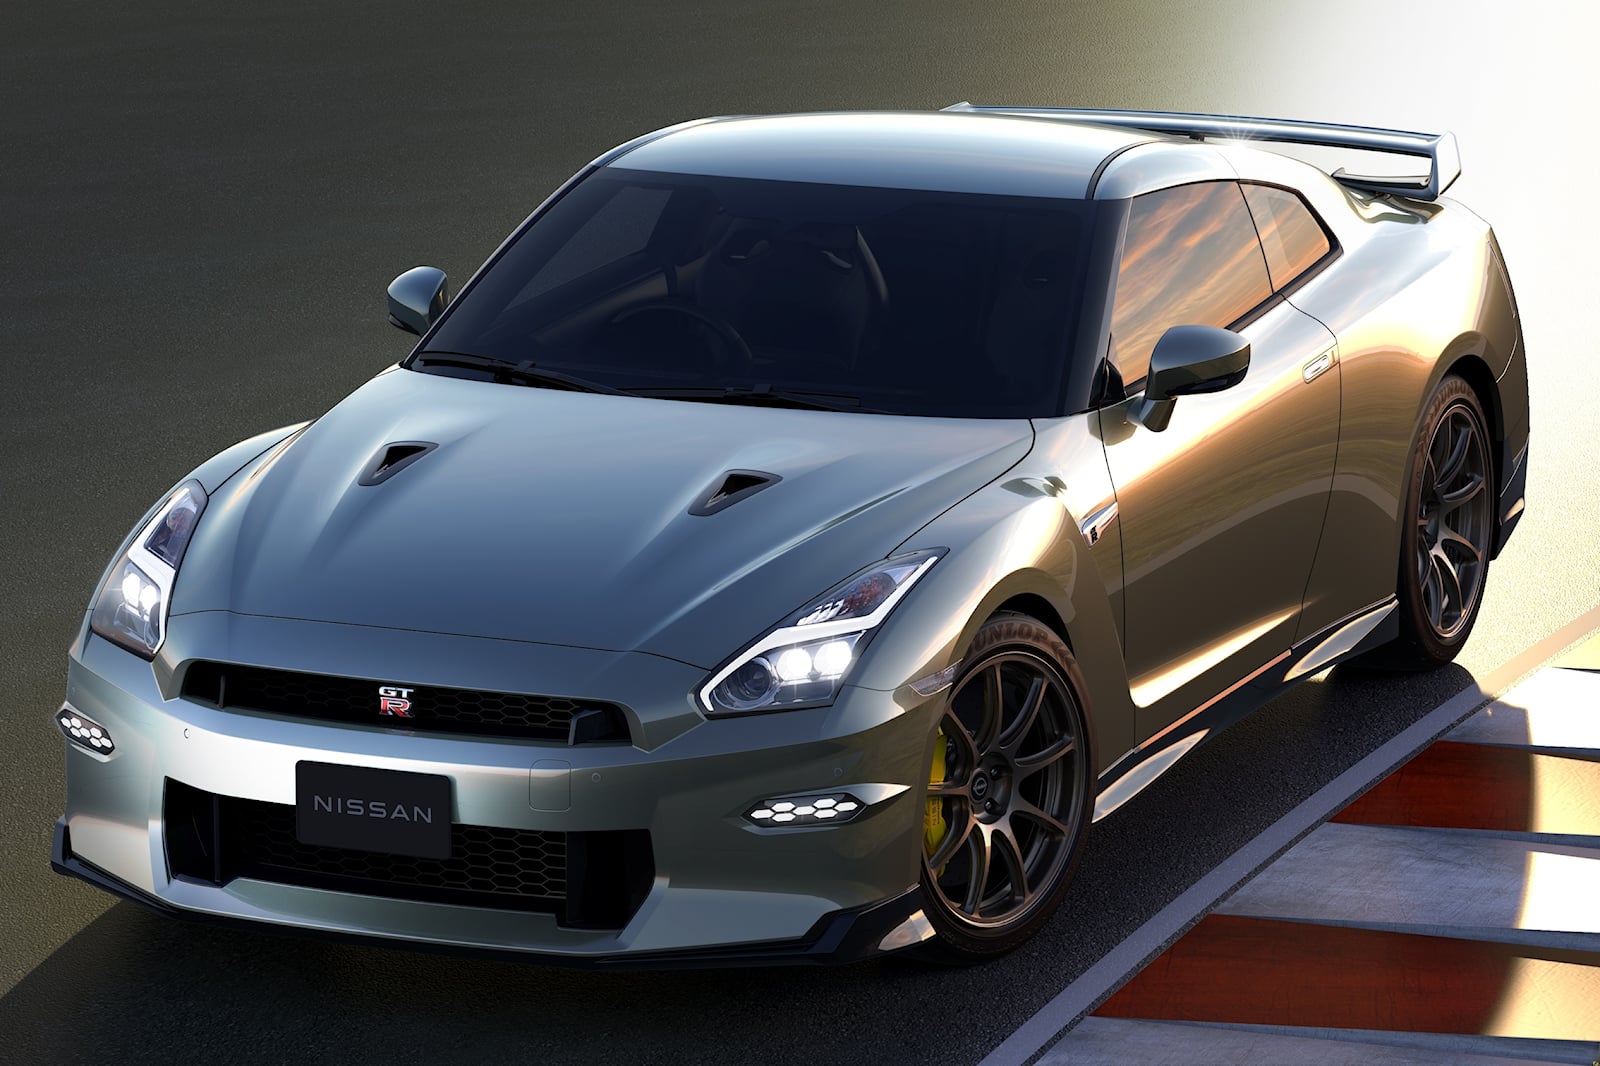 Nissan GT-R models, specs, review and more